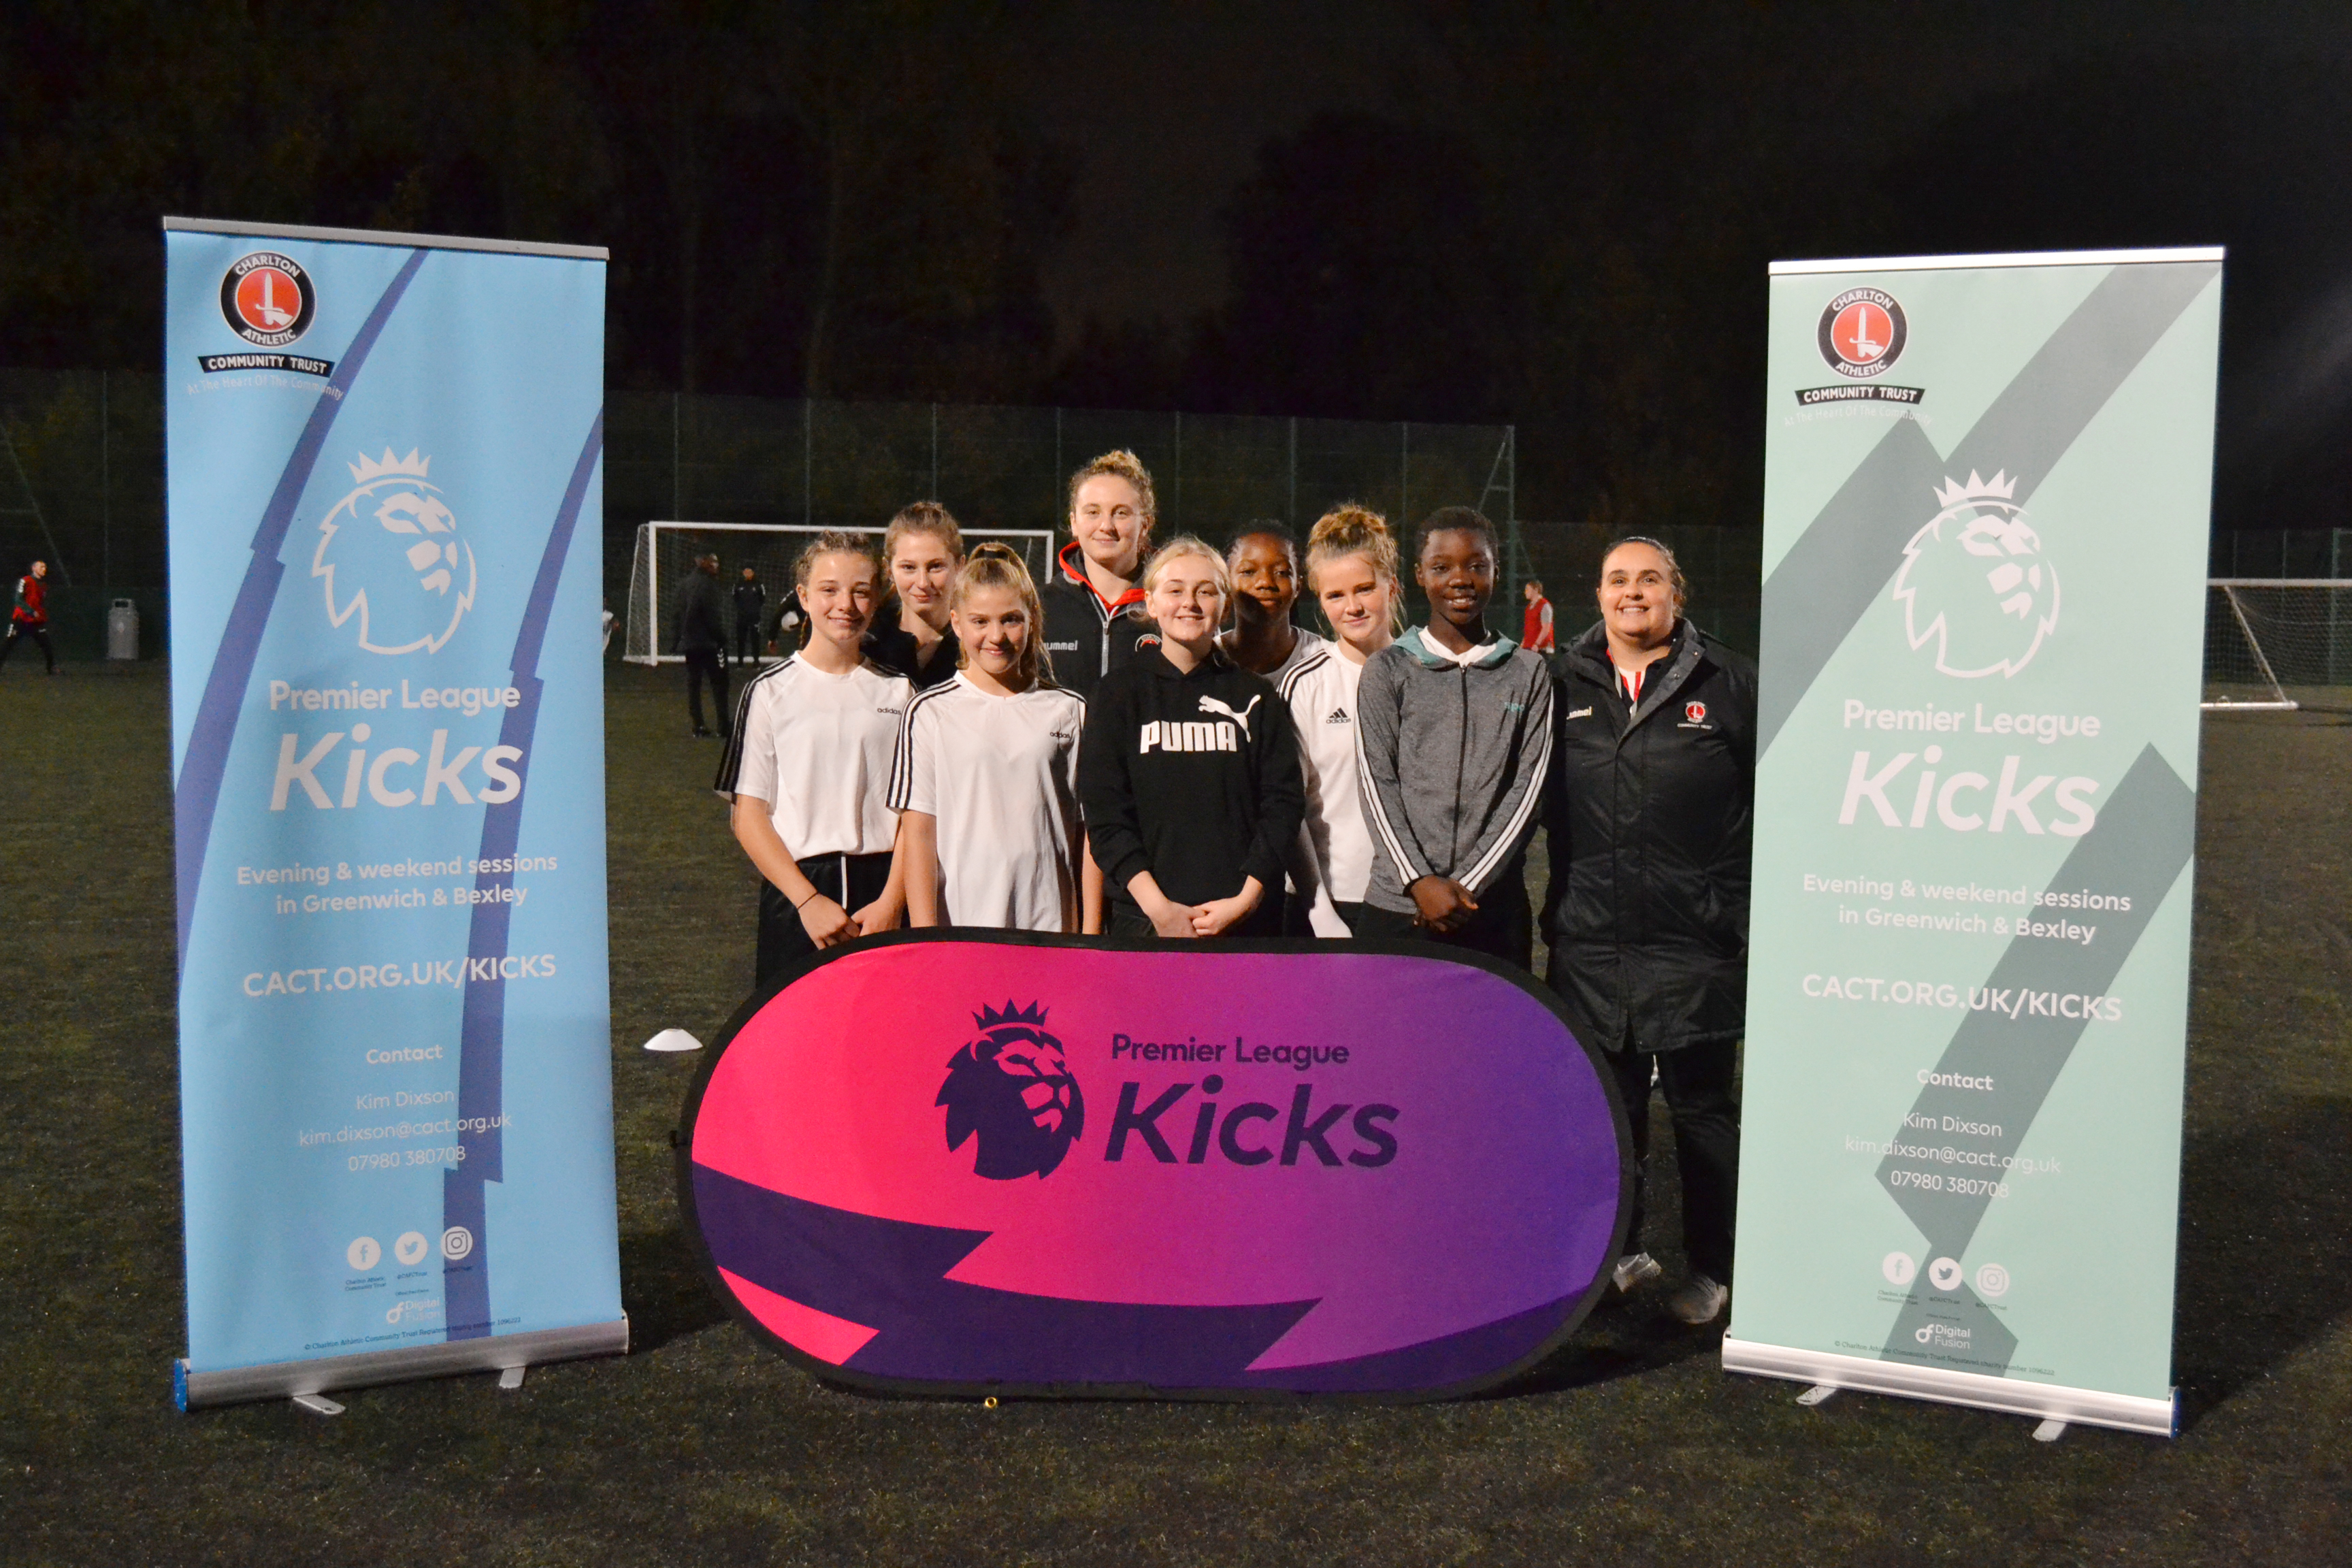 A group of young people at a Premier League Kicks event